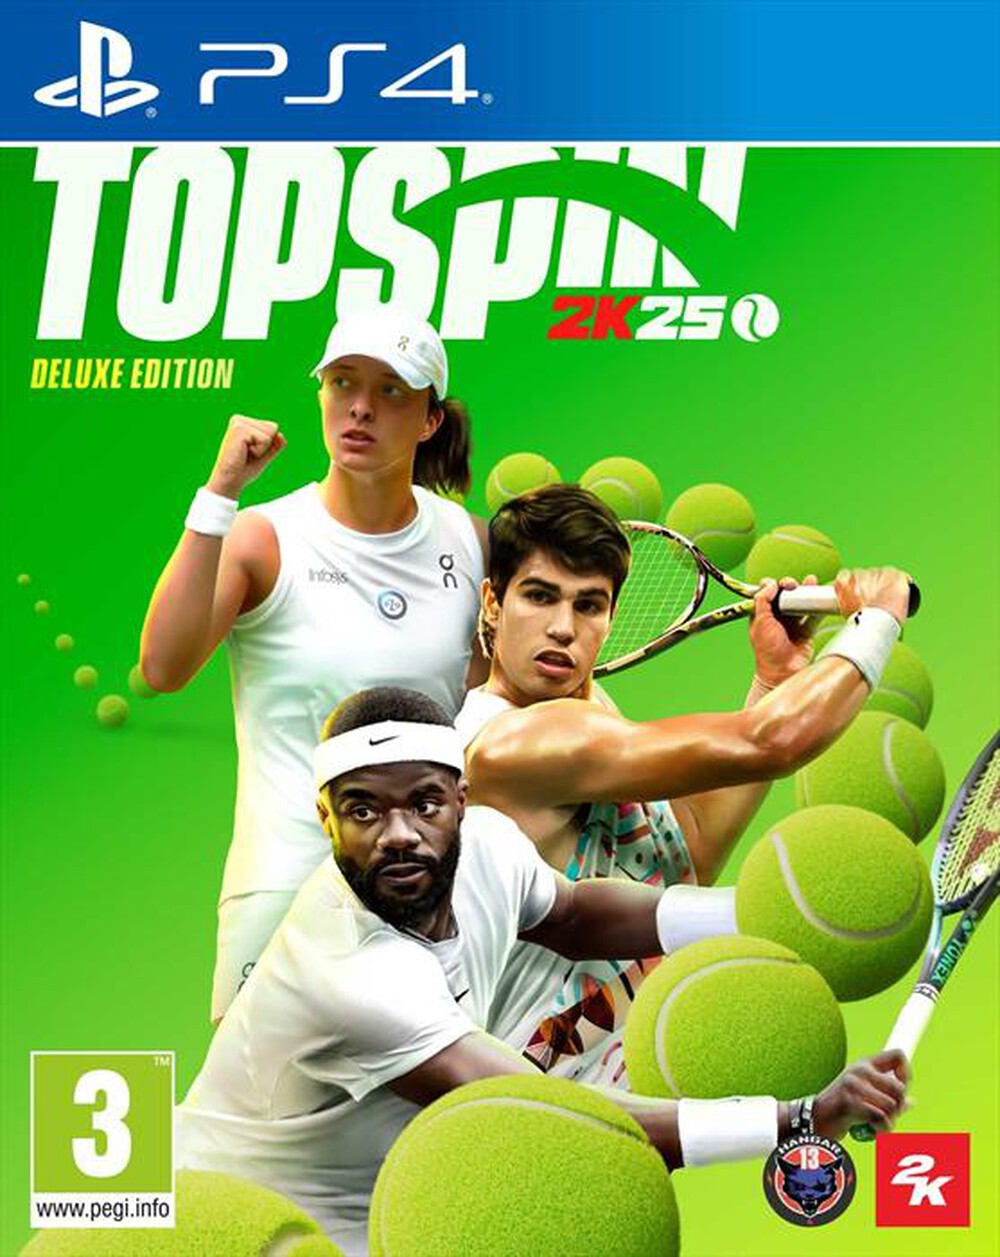 "2K GAMES - TOPSPIN 2K25 (DELUXE EDITION)"